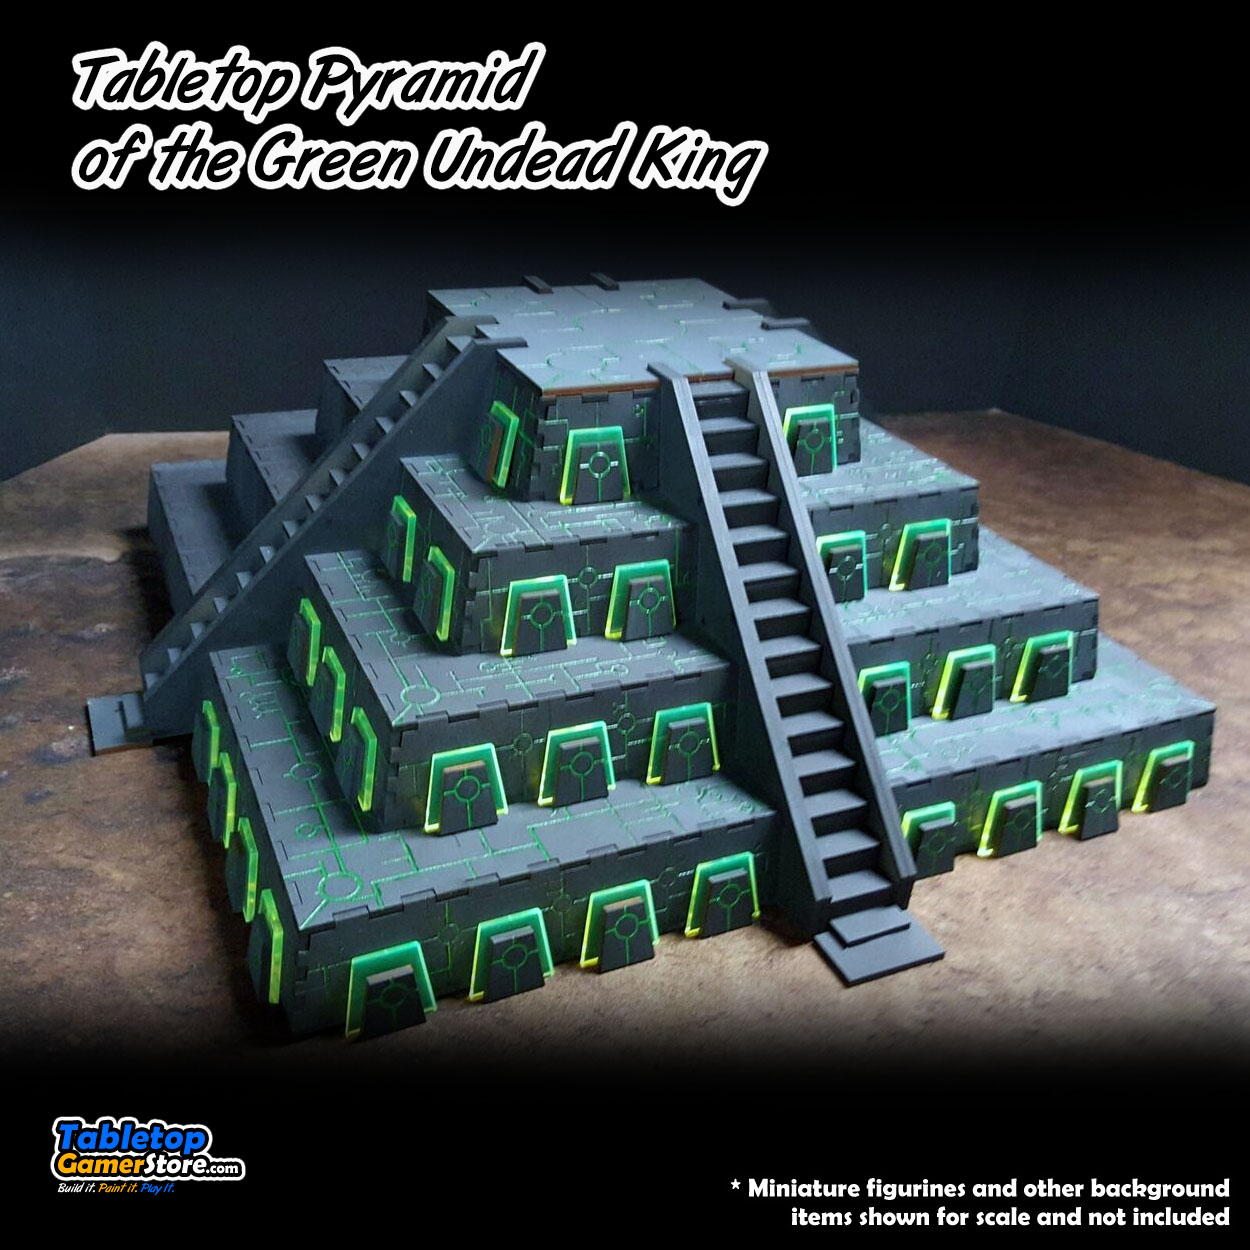 tabletop_pyramid_green_undead_king_02